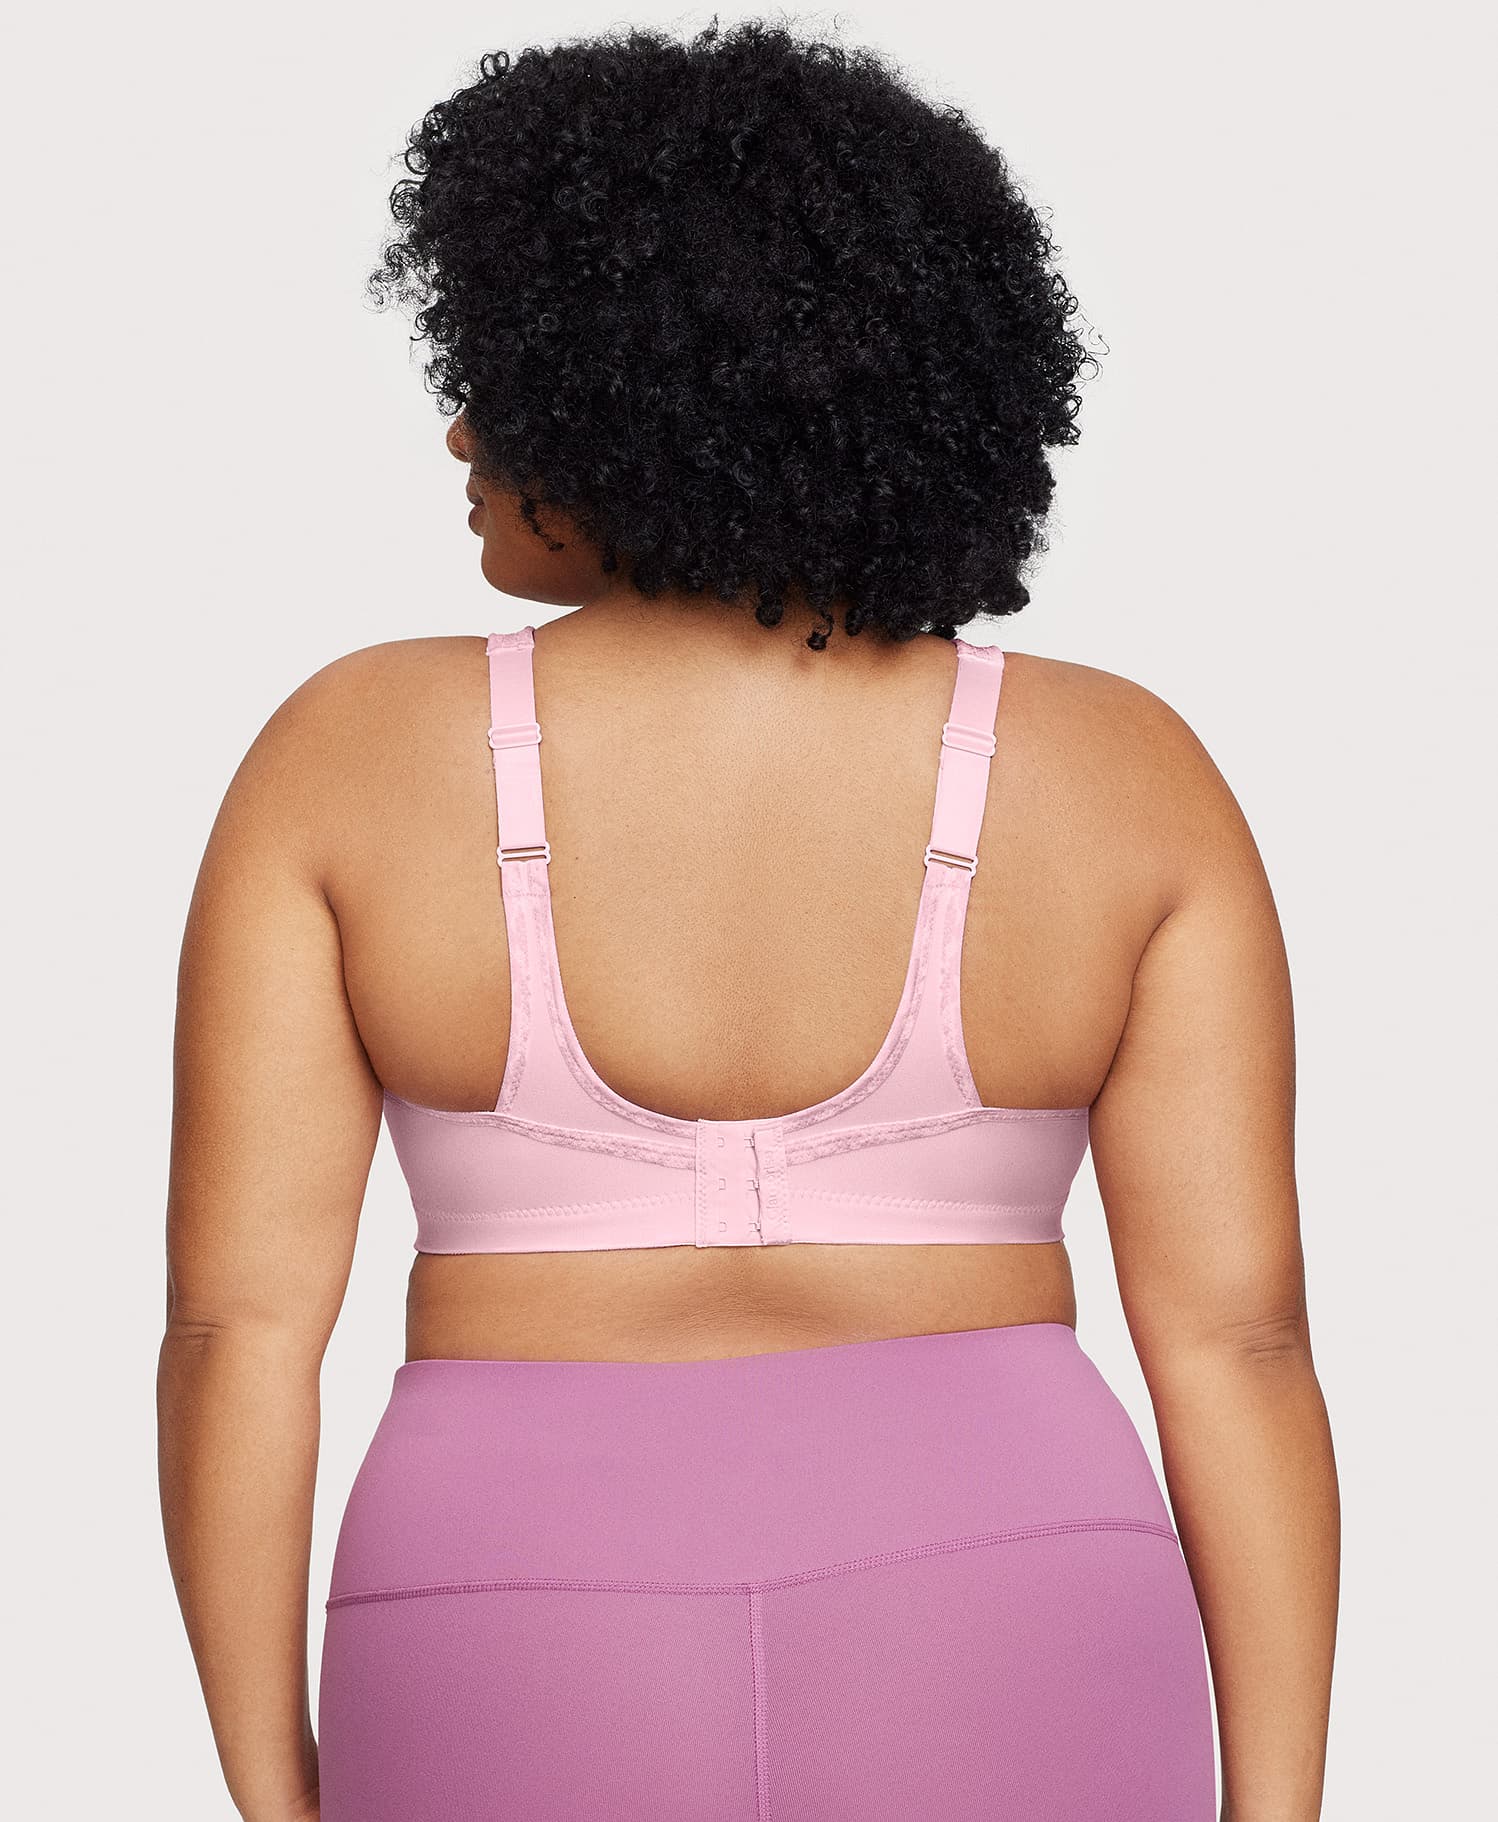 New Glamorise 38F Softcup Sports Bra Style #1000 Size undefined - $18 New  With Tags - From Shoptillyoudrop